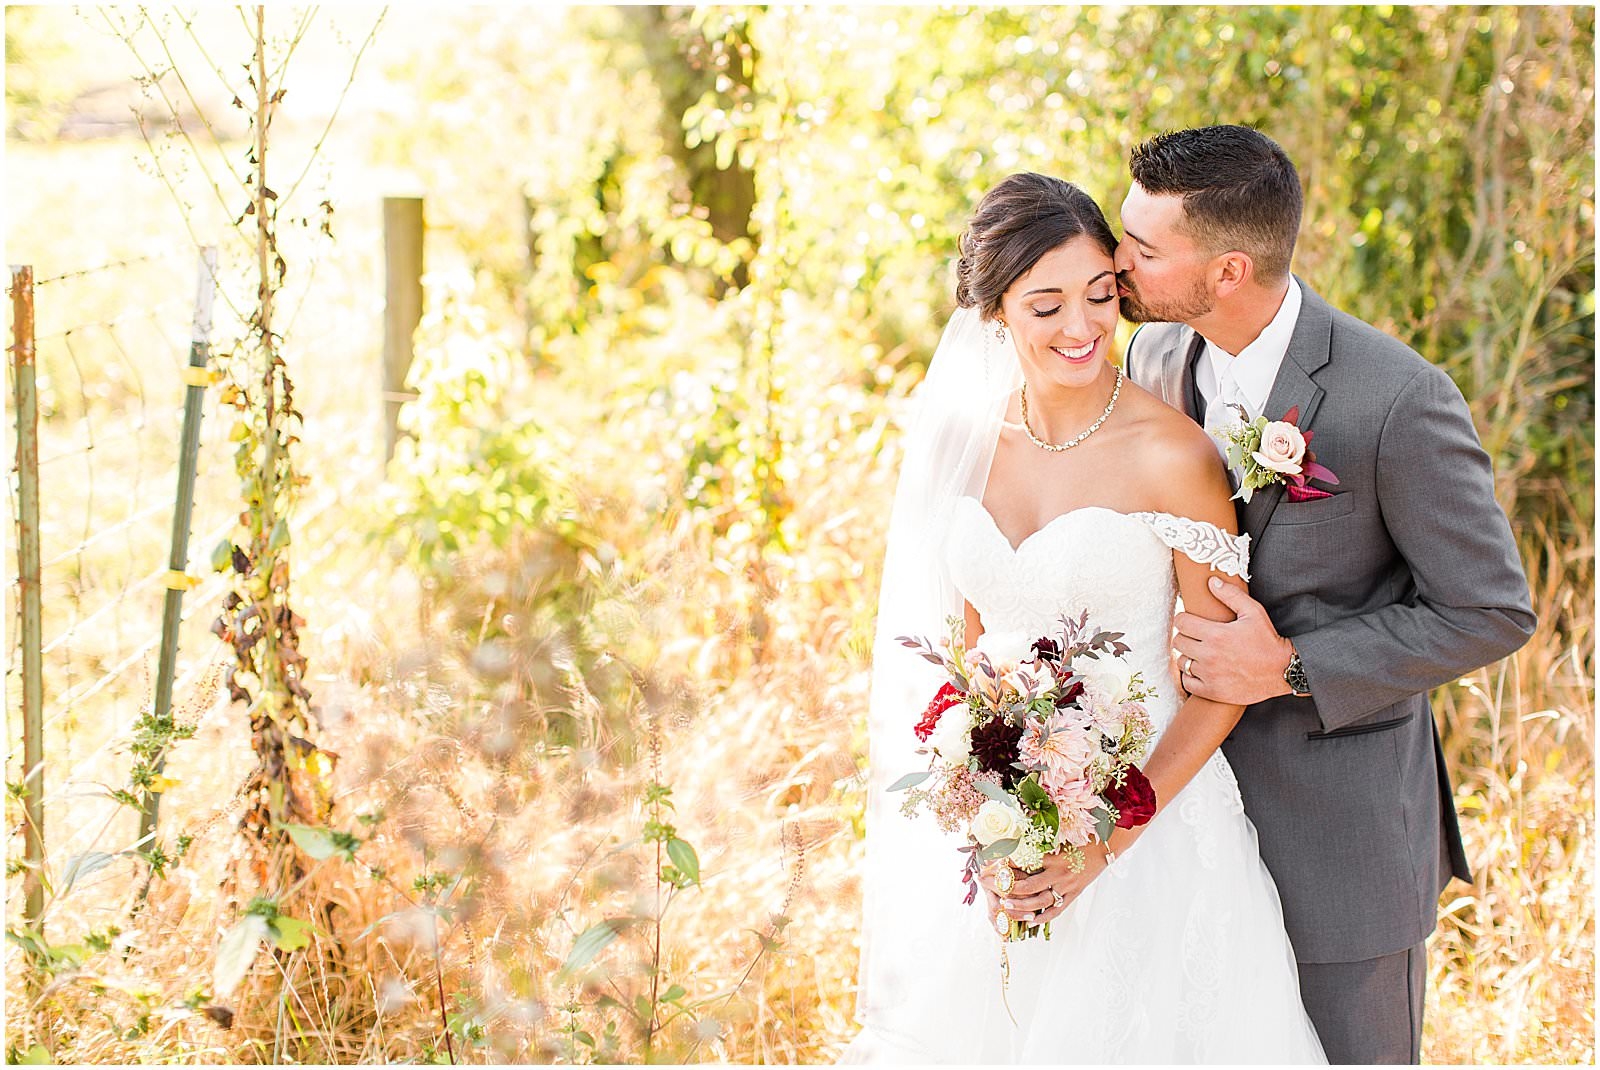 A Stunning Fall Wedding in Indianapolis, IN |. Sally and Andrew | Bret and Brandie Photography 0121.jpg